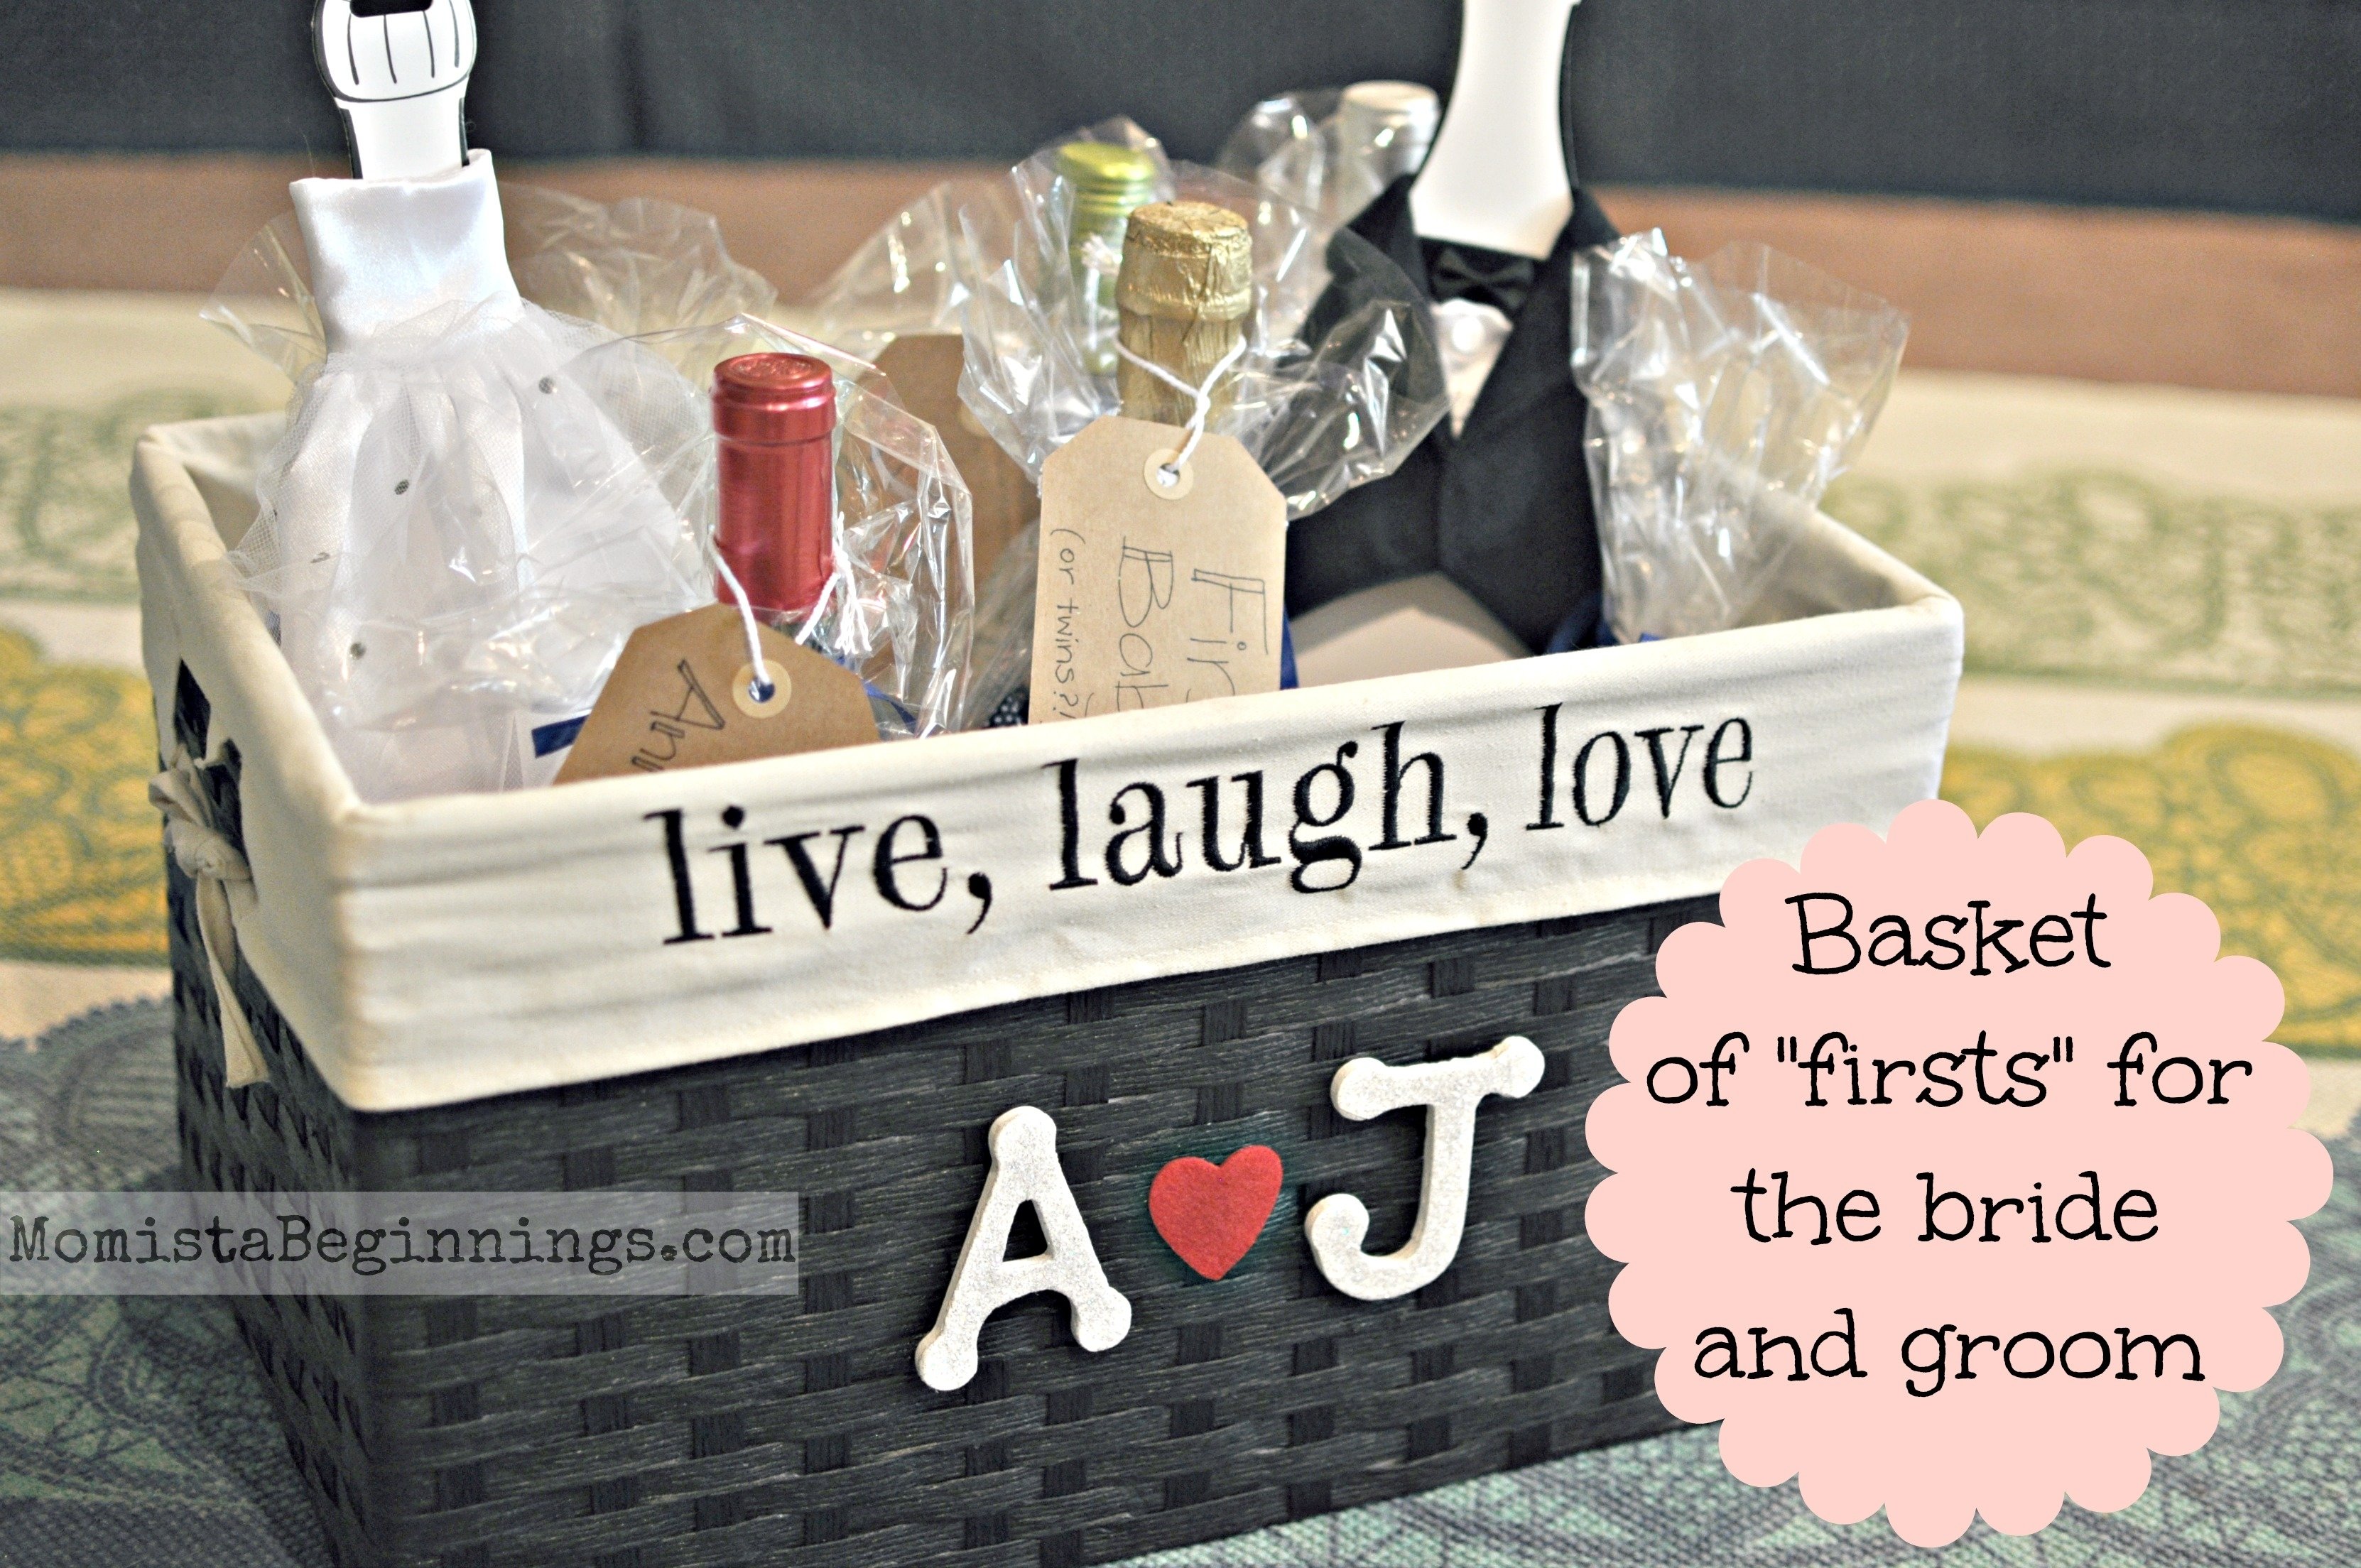 10 Ideal Bridal Shower Gift Basket Ideas basket of firsts for the bride and groom diy momista beginnings 1 2022